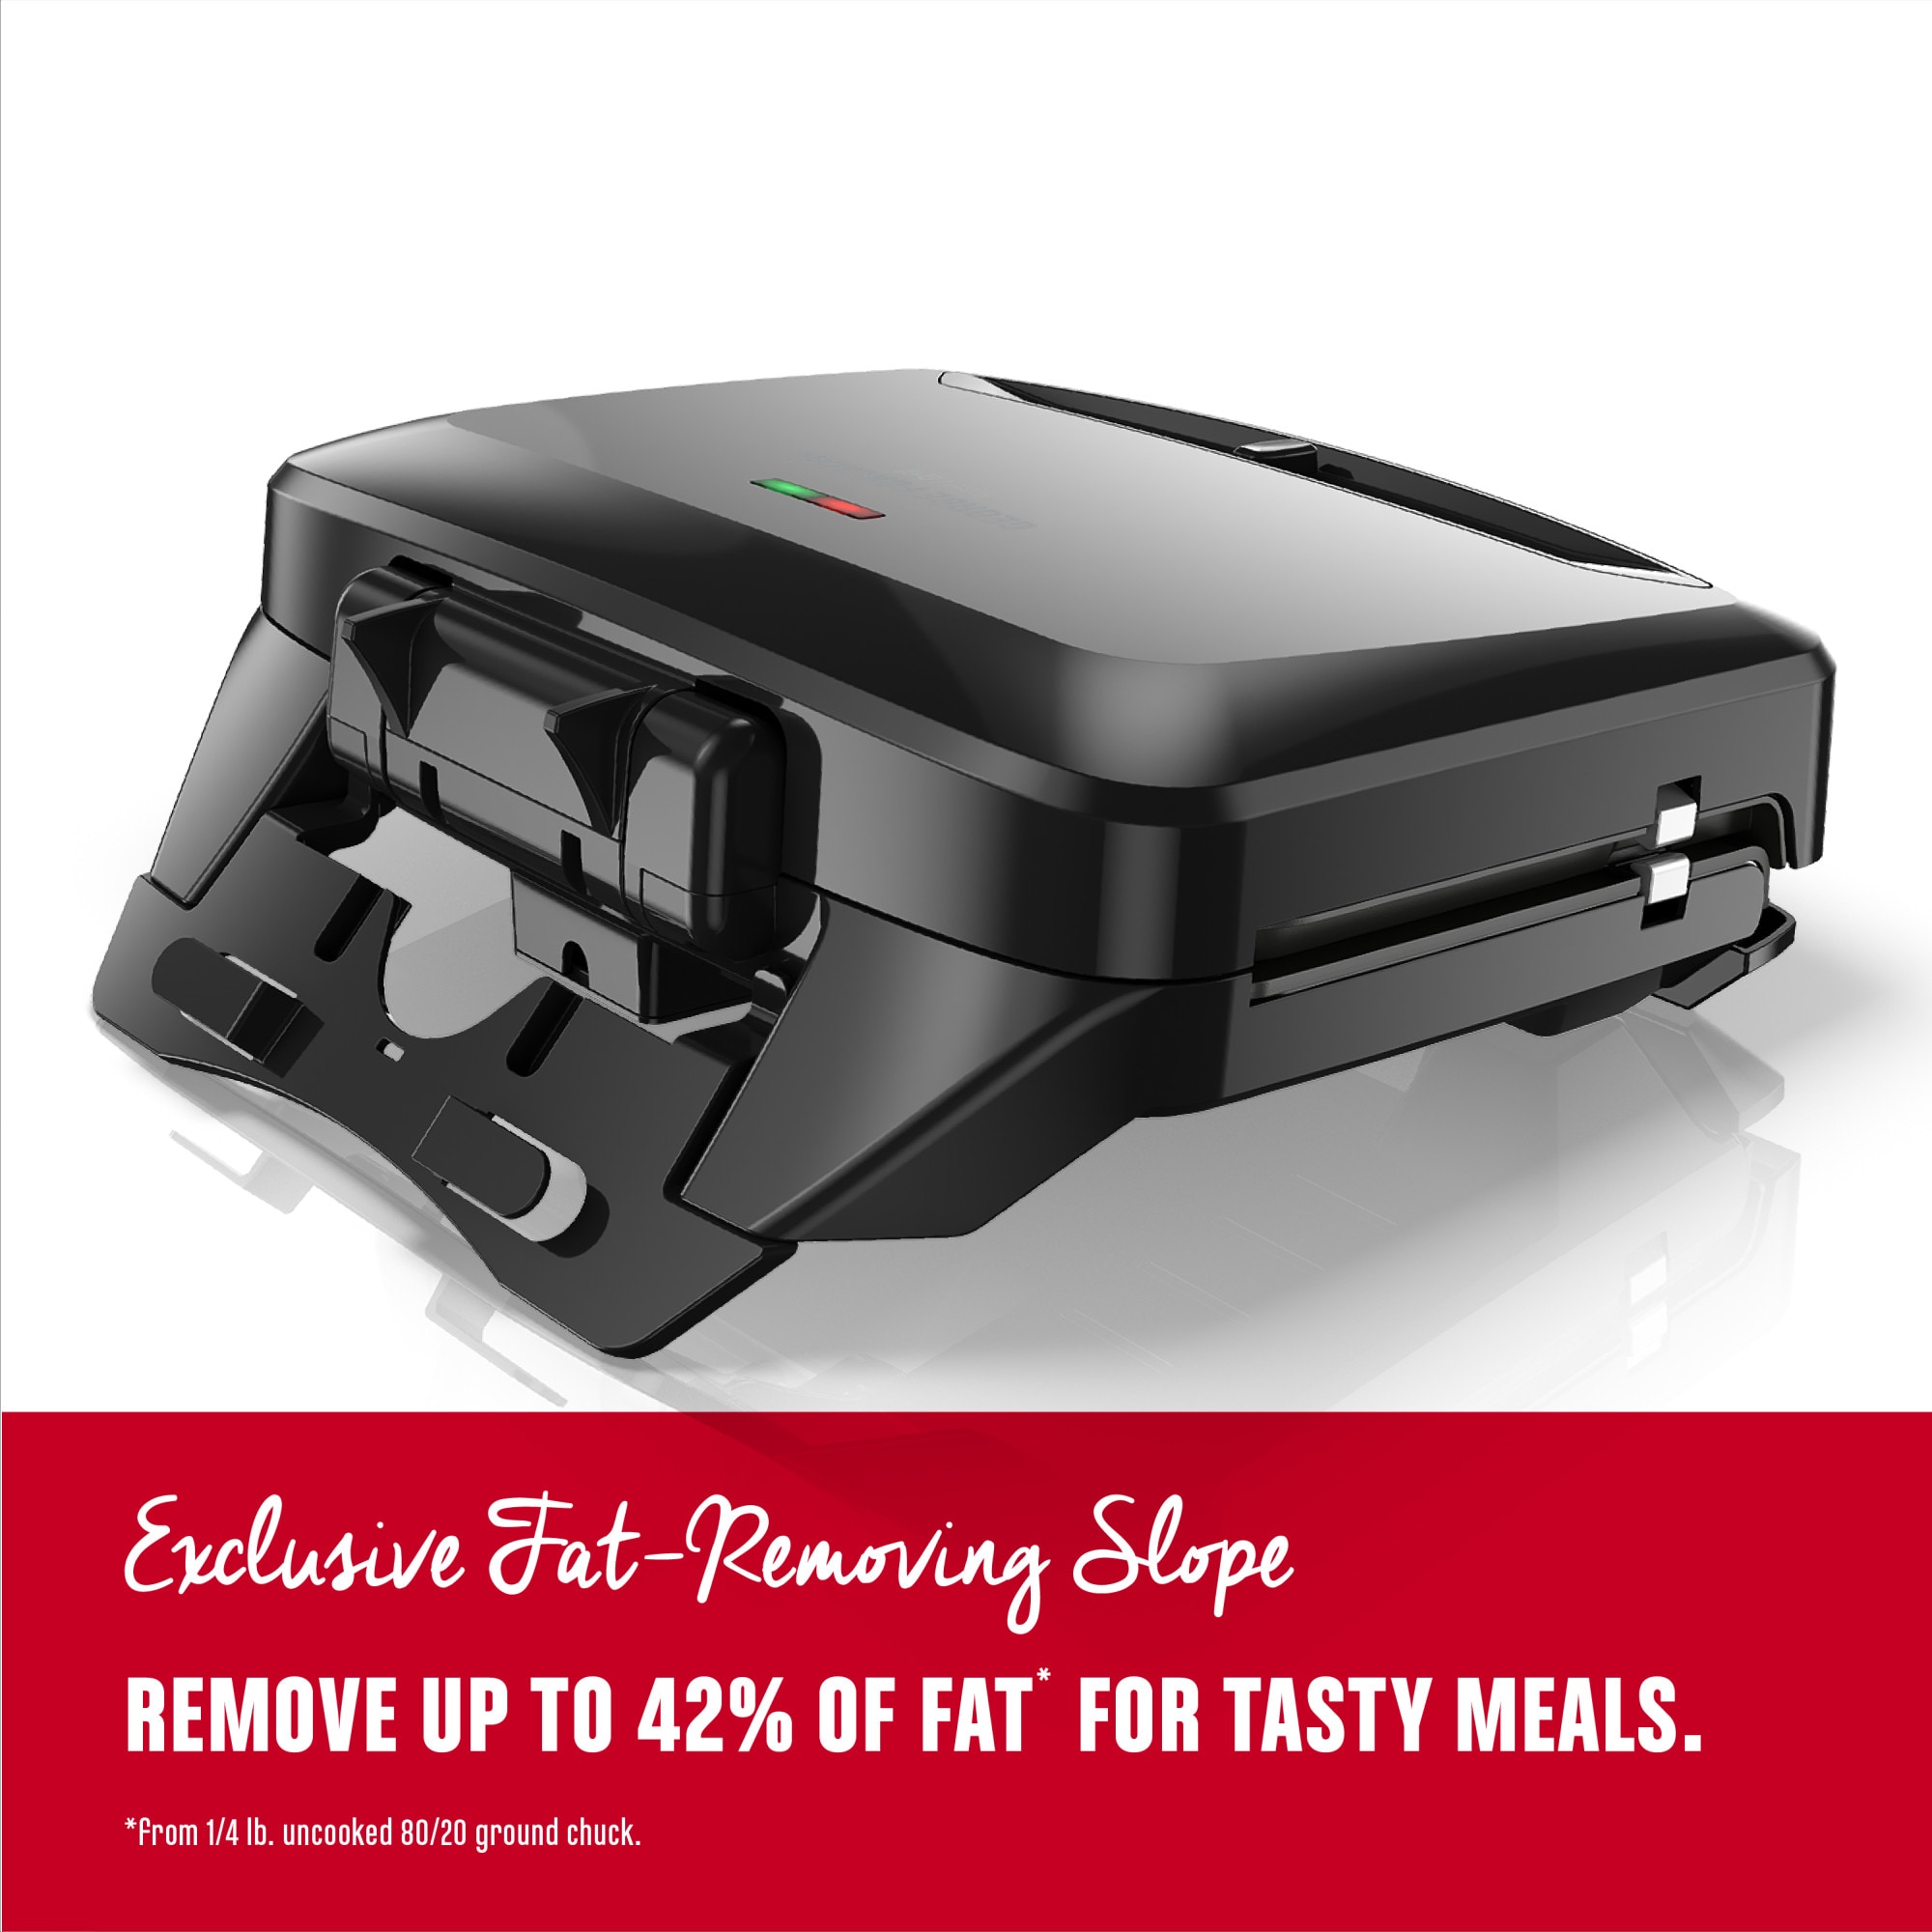 George Foreman Rapid Grill Series, 4-Serving Removable Plate